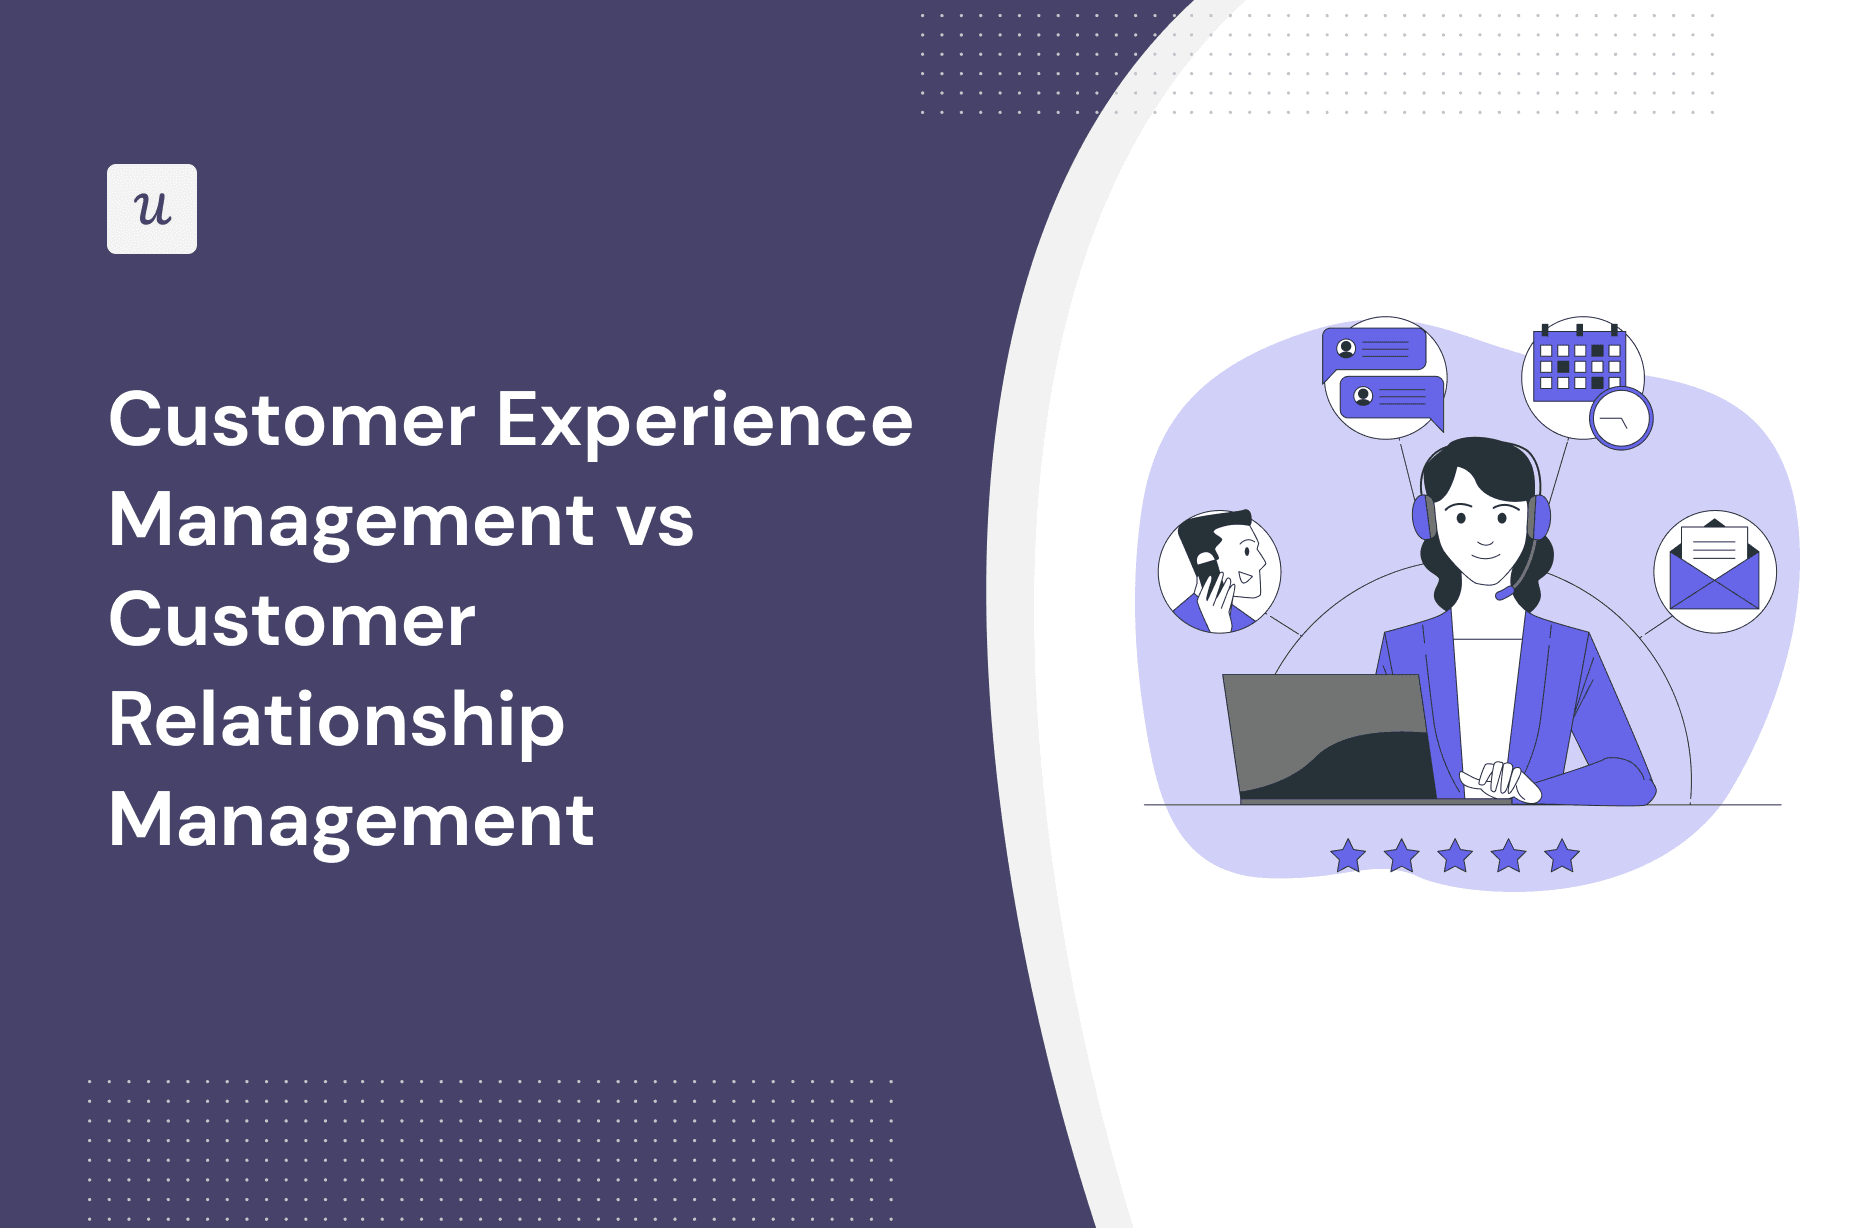 Customer Experience Management vs Customer Relationship Management cover